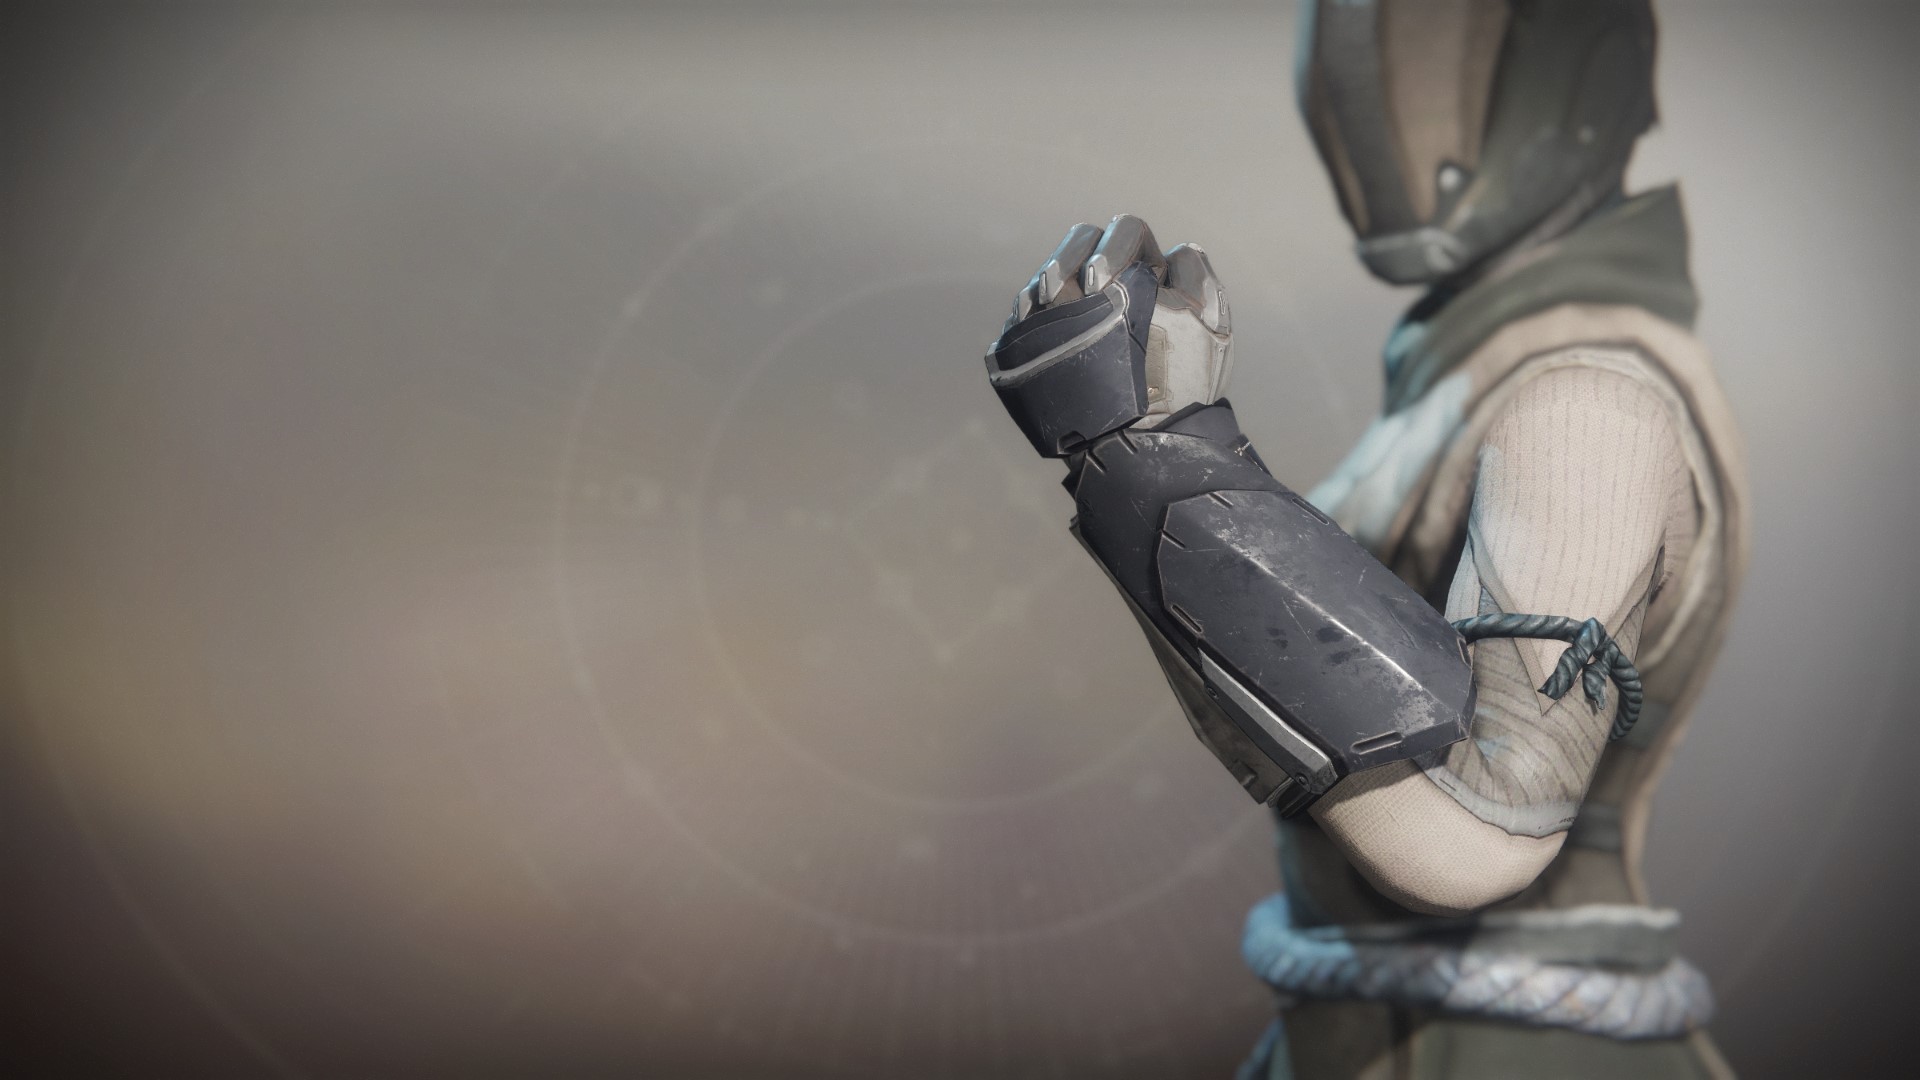 An in-game render of the Gloves of the Cormorant Blade.